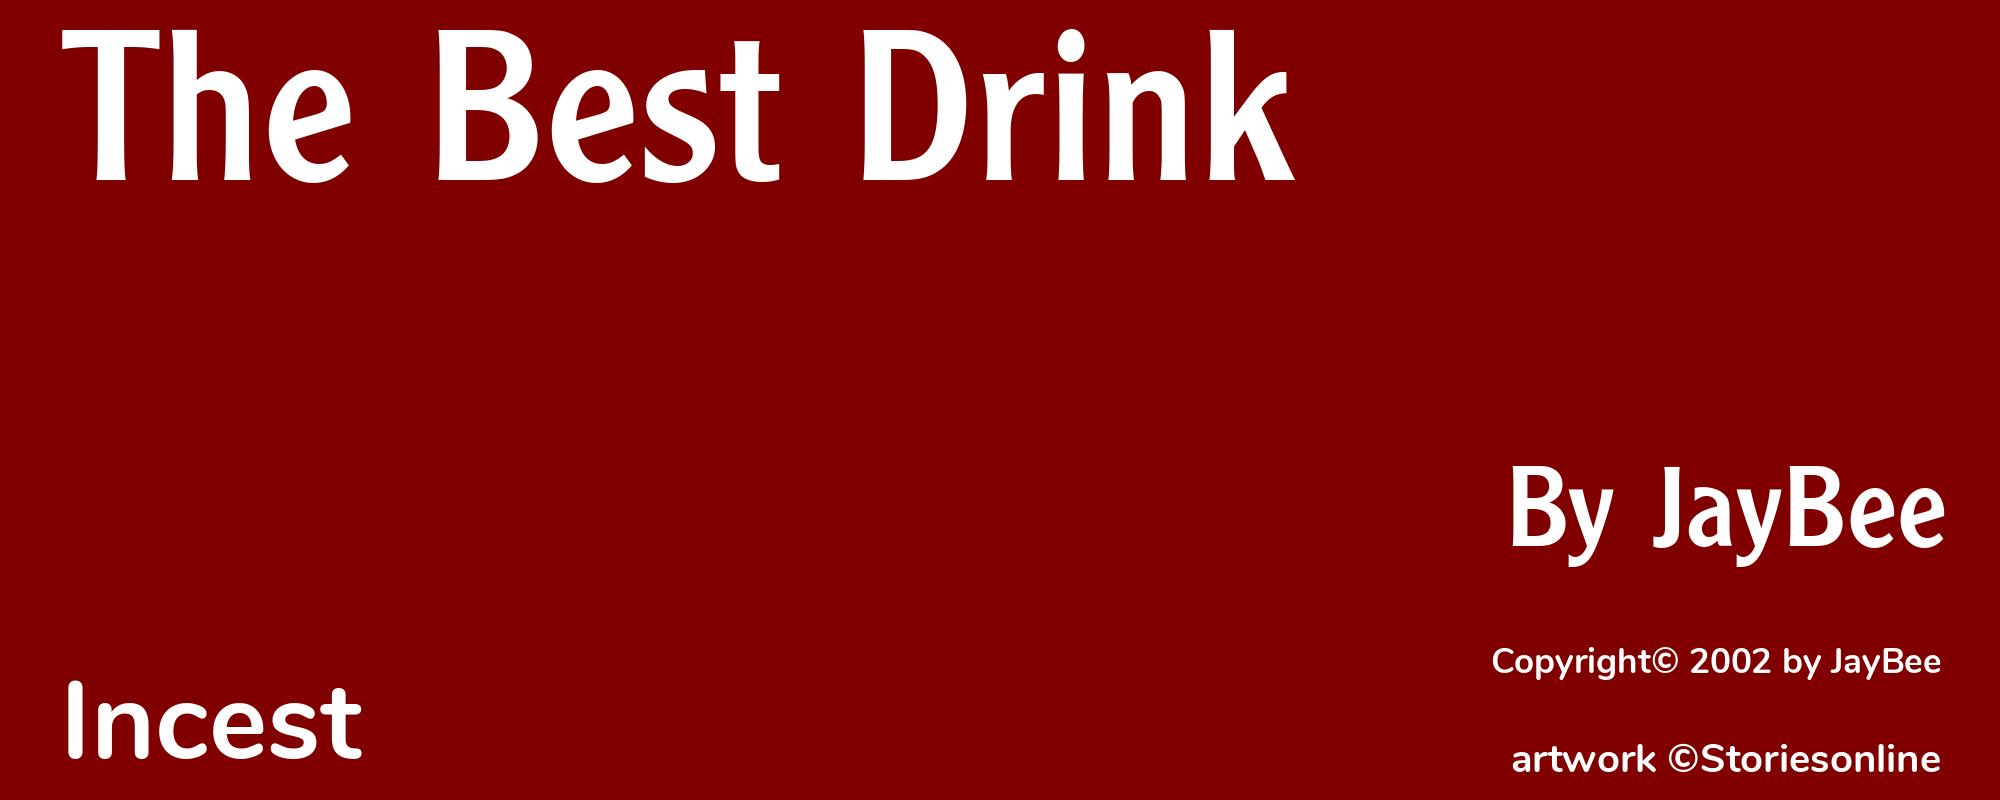 The Best Drink - Cover